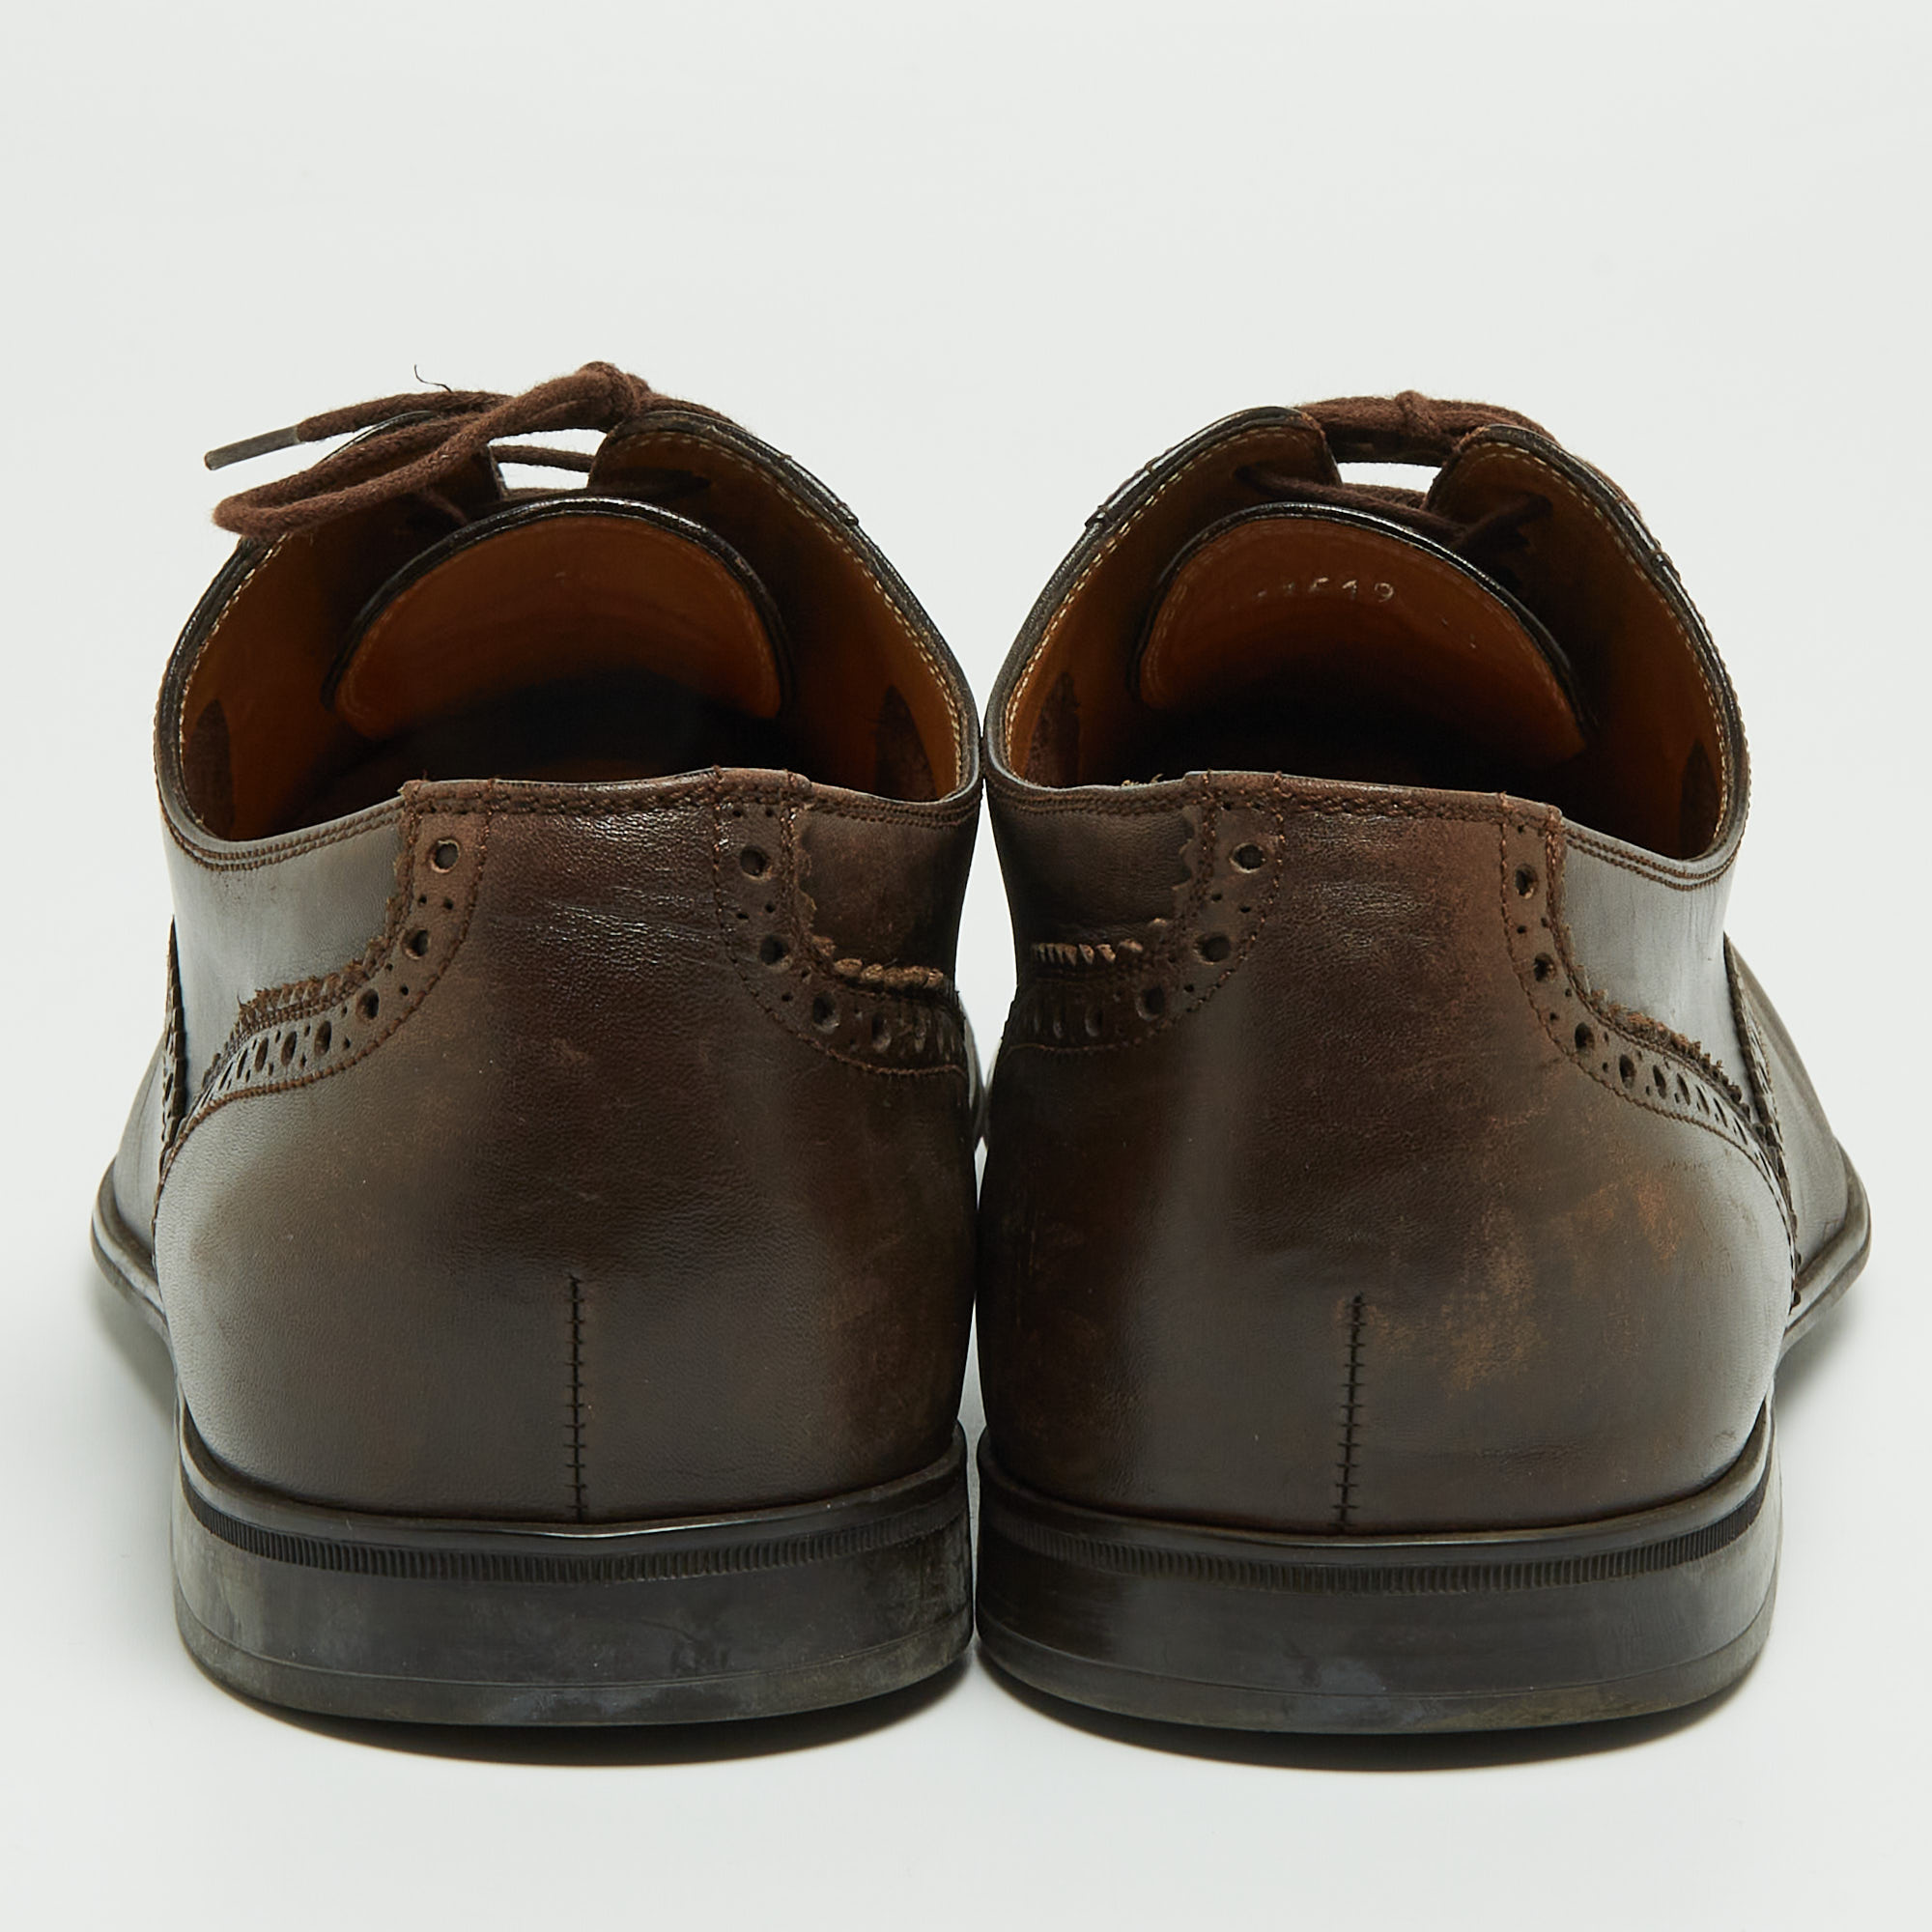 Gucci Brown Leather Brogue Oxfords Size 45.5